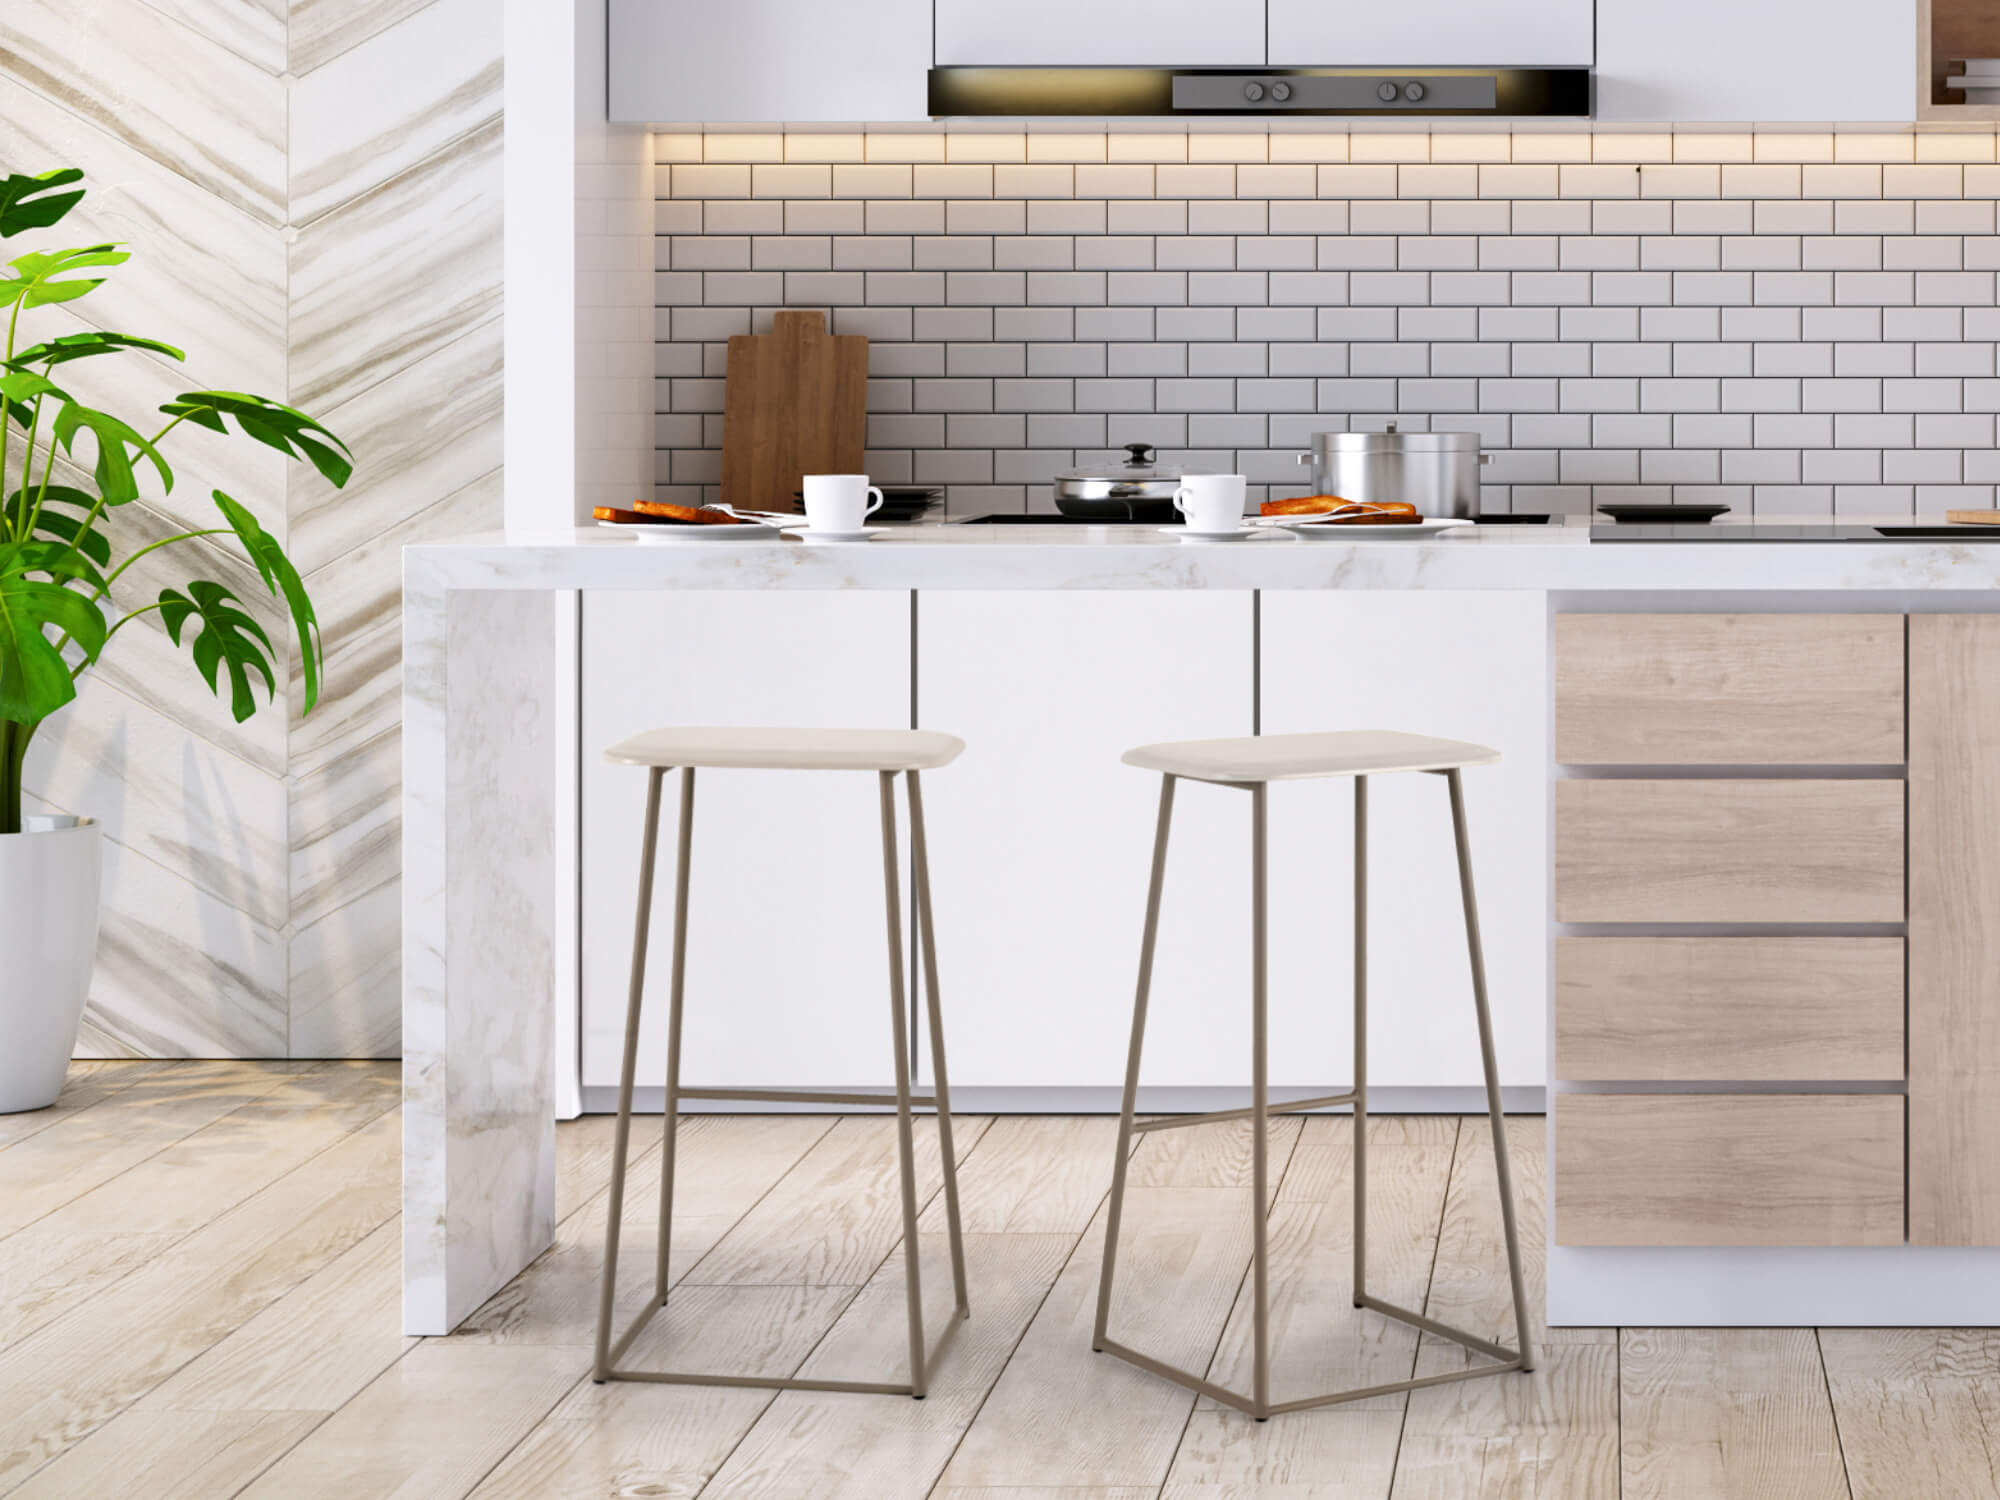 Trica's Palmo Modern Backless Bar Stools in Kitchen Design